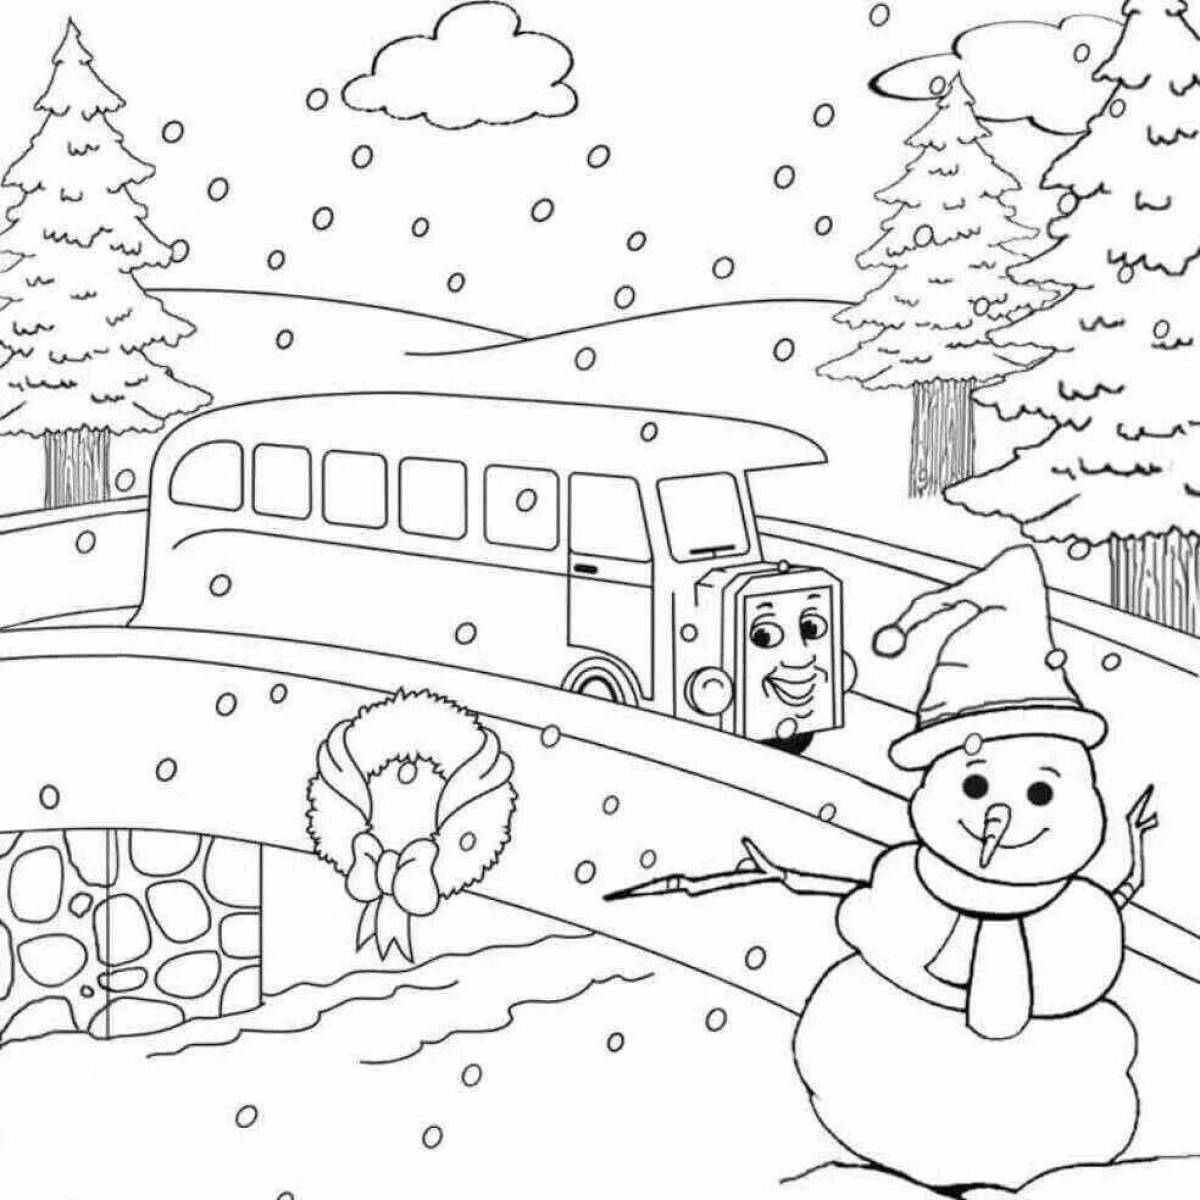 Large winter coloring book for 3-4 year olds